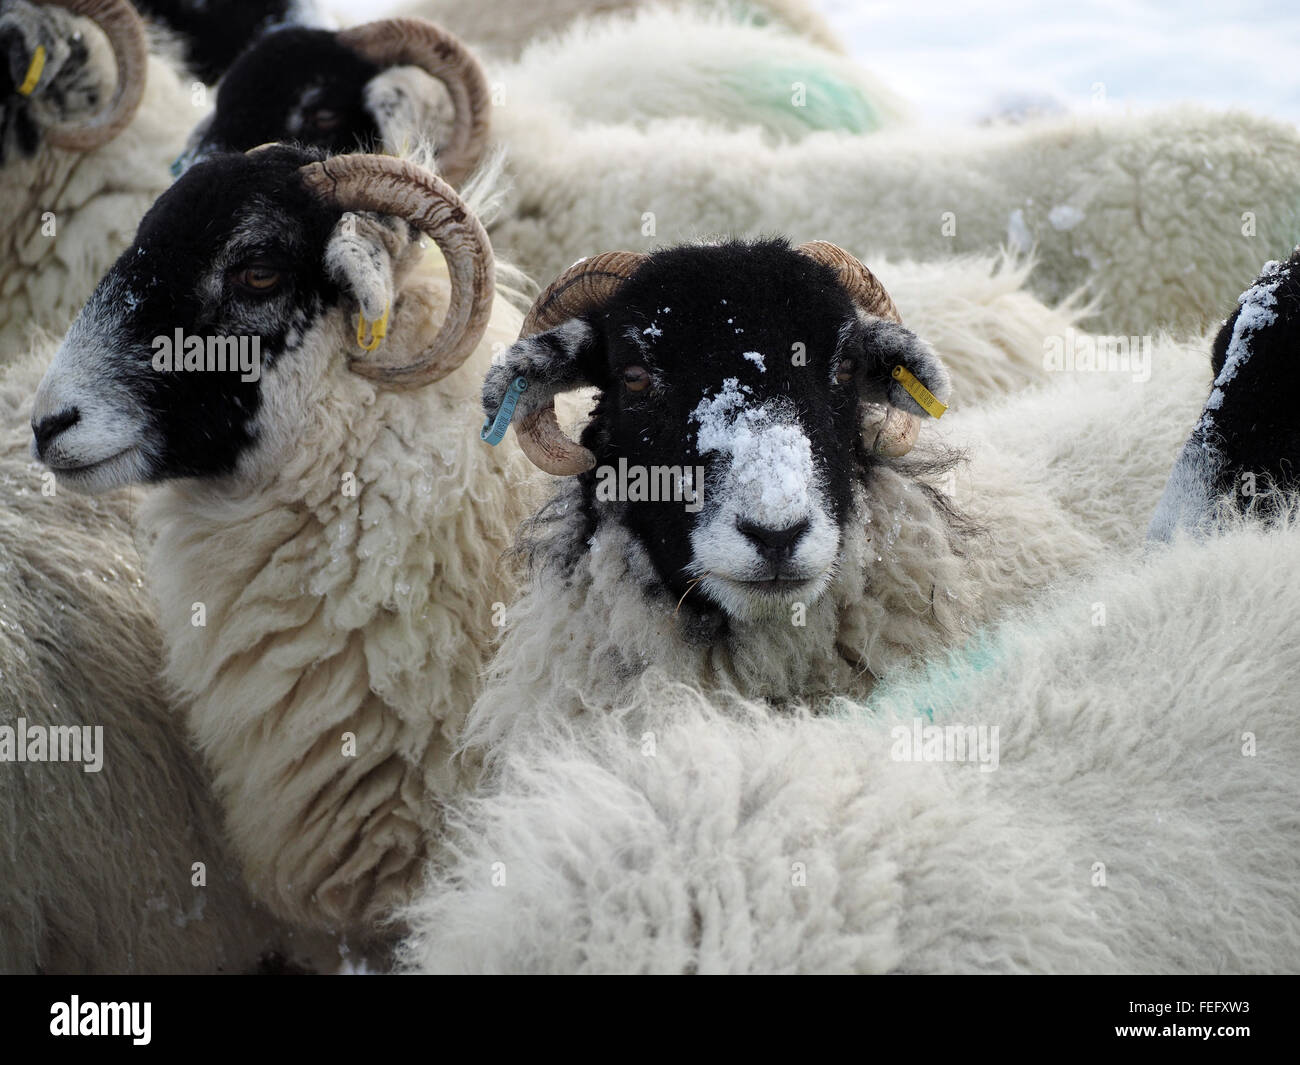 ewes with snow on faces & yellow and blue tags in crowded flock of black faced sheep waiting for feed in snowy winter conditions Stock Photo